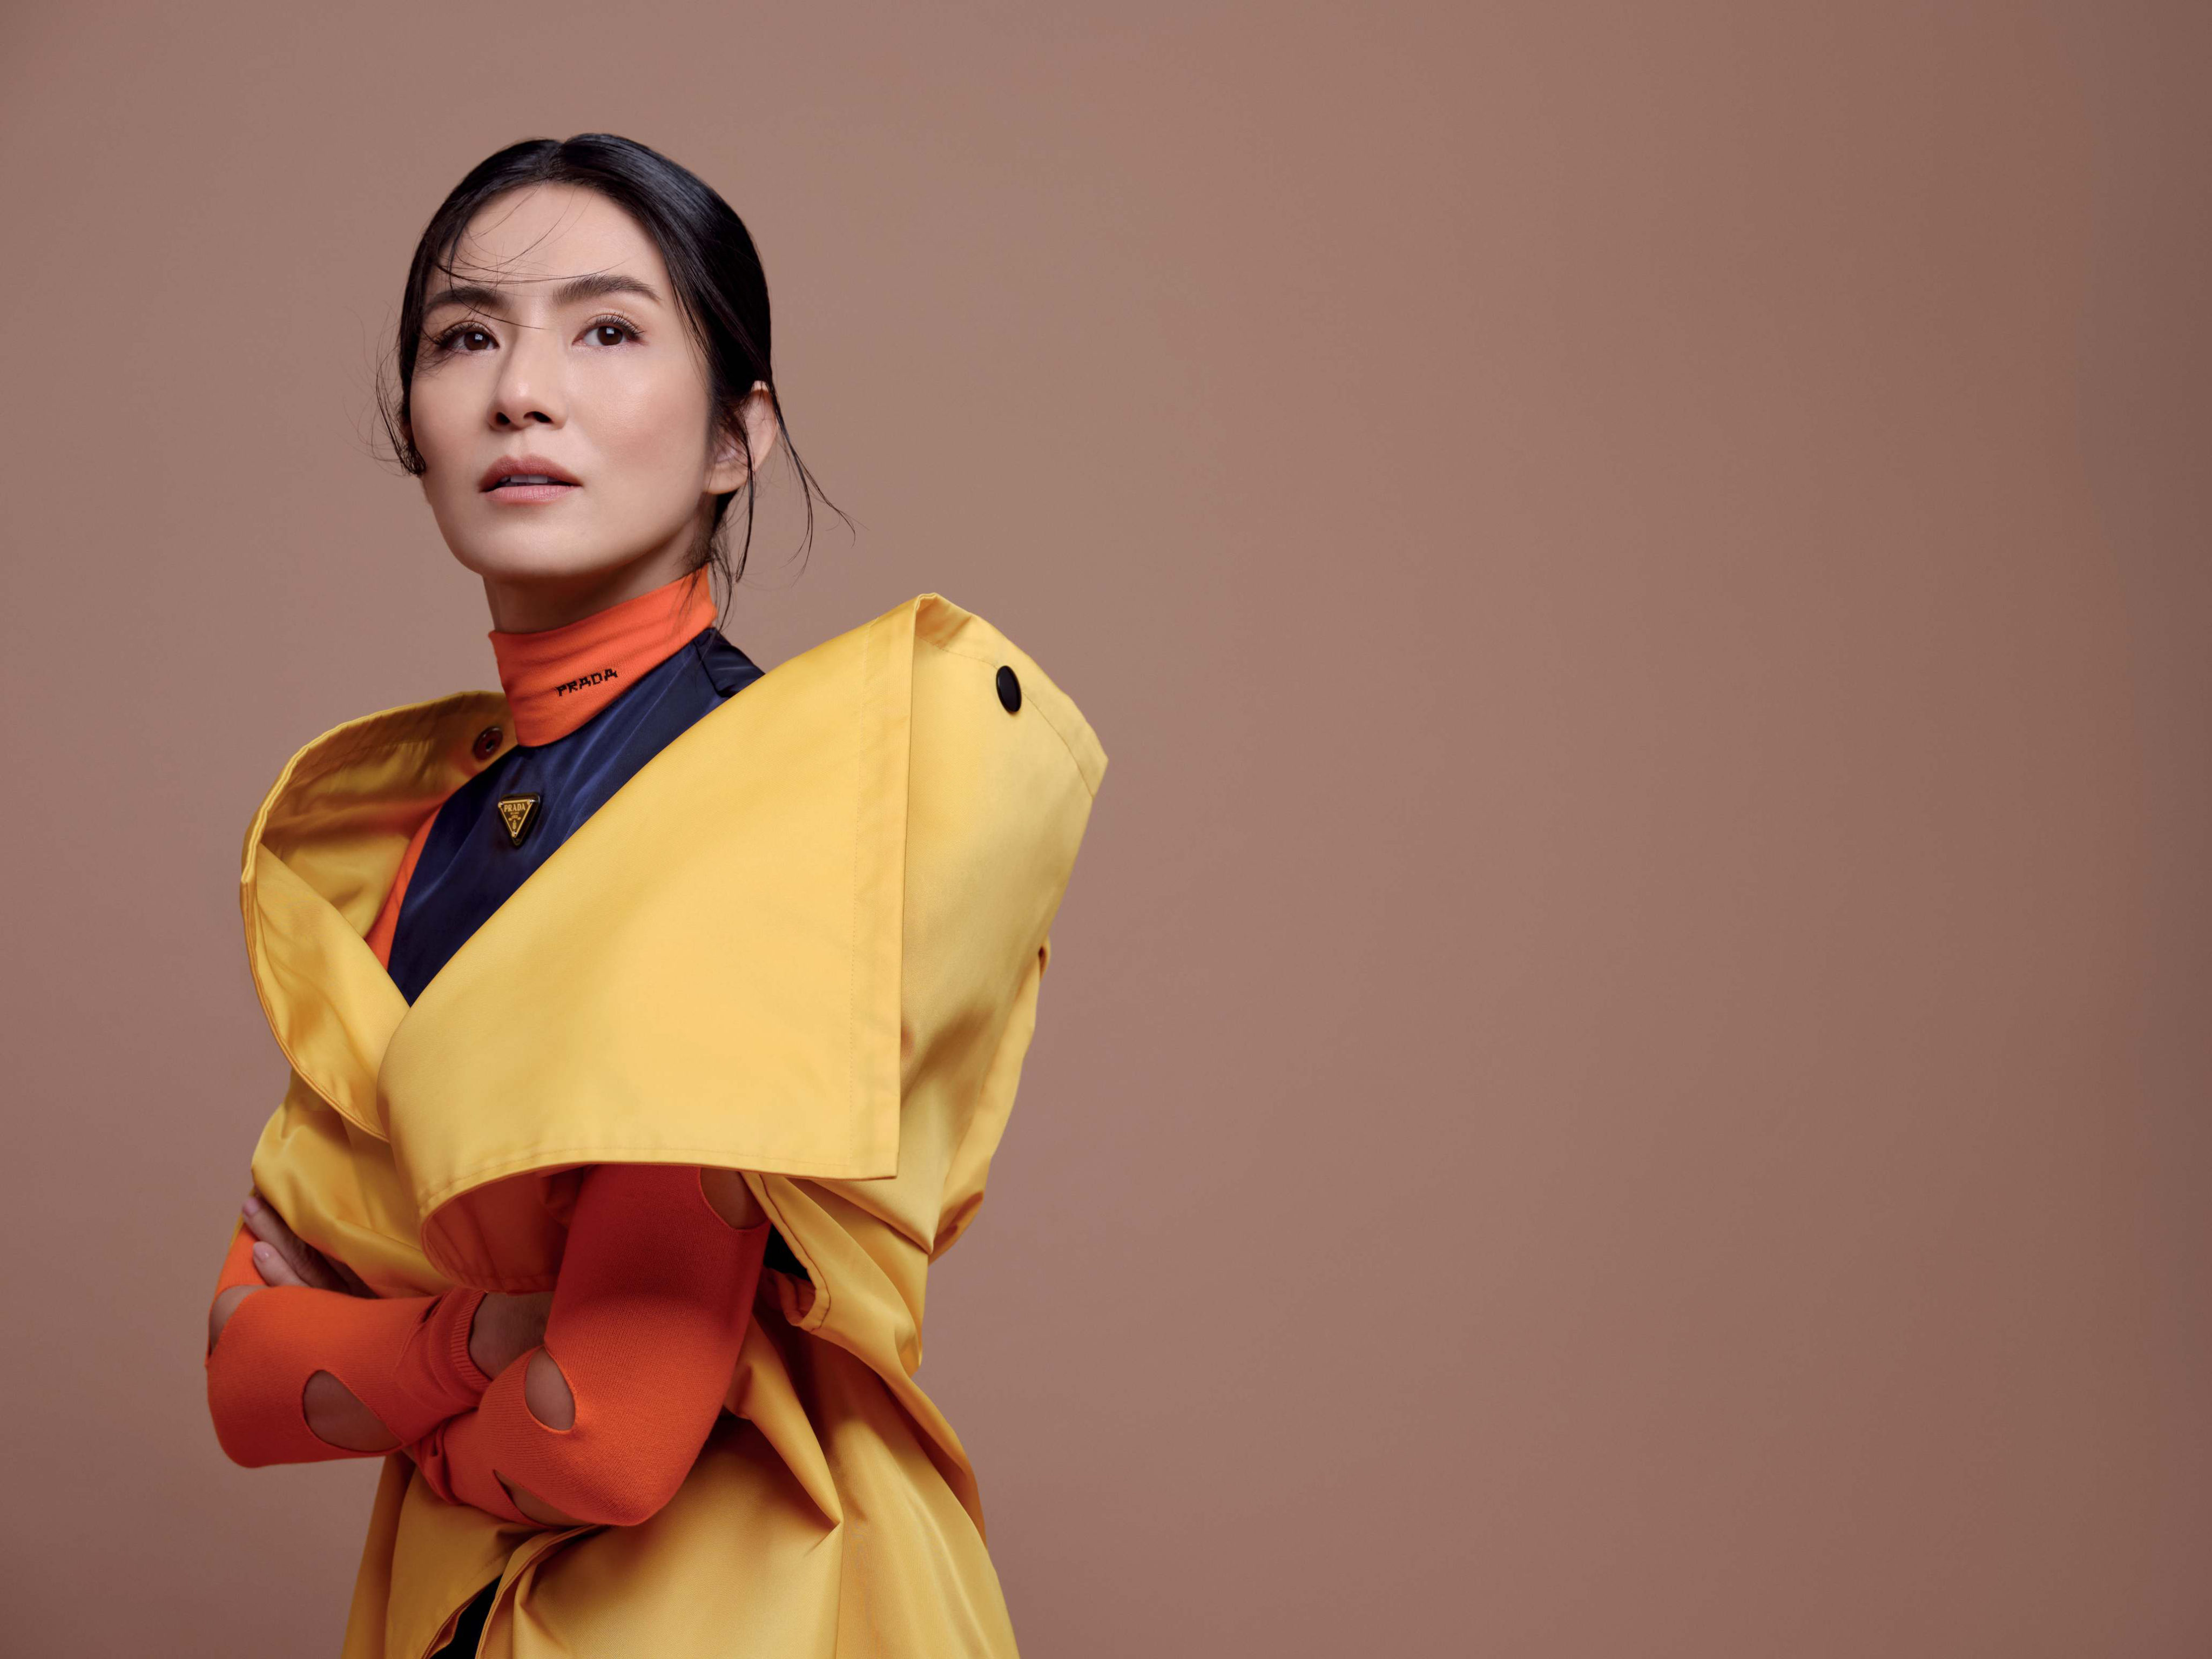 Taiwanese-Hong Kong actress Charlie Yeung, 47, in an advert for Prada. She says her children are the reason she feels younger than ever – “our interaction with them makes us young”. Photo: Wee Khim for PIN Prestige SG